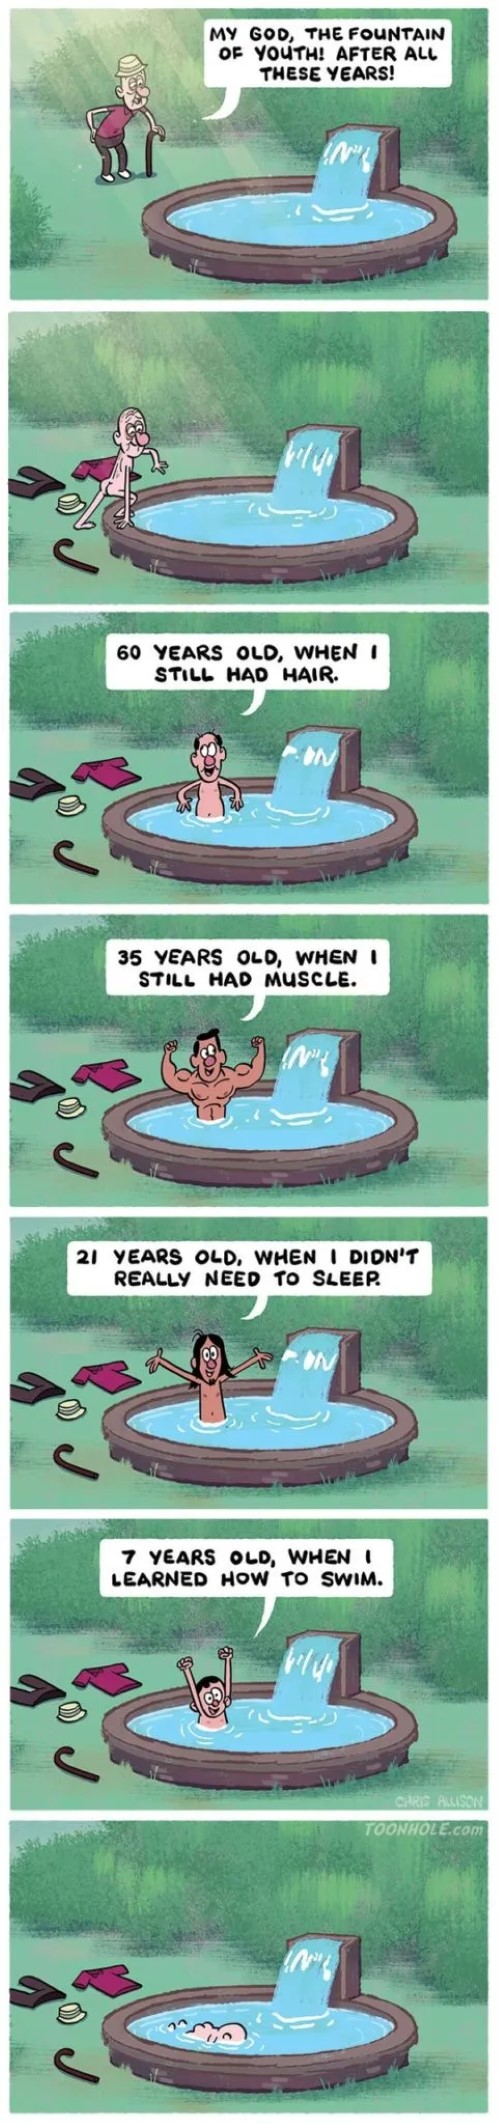 fountain of youth comic